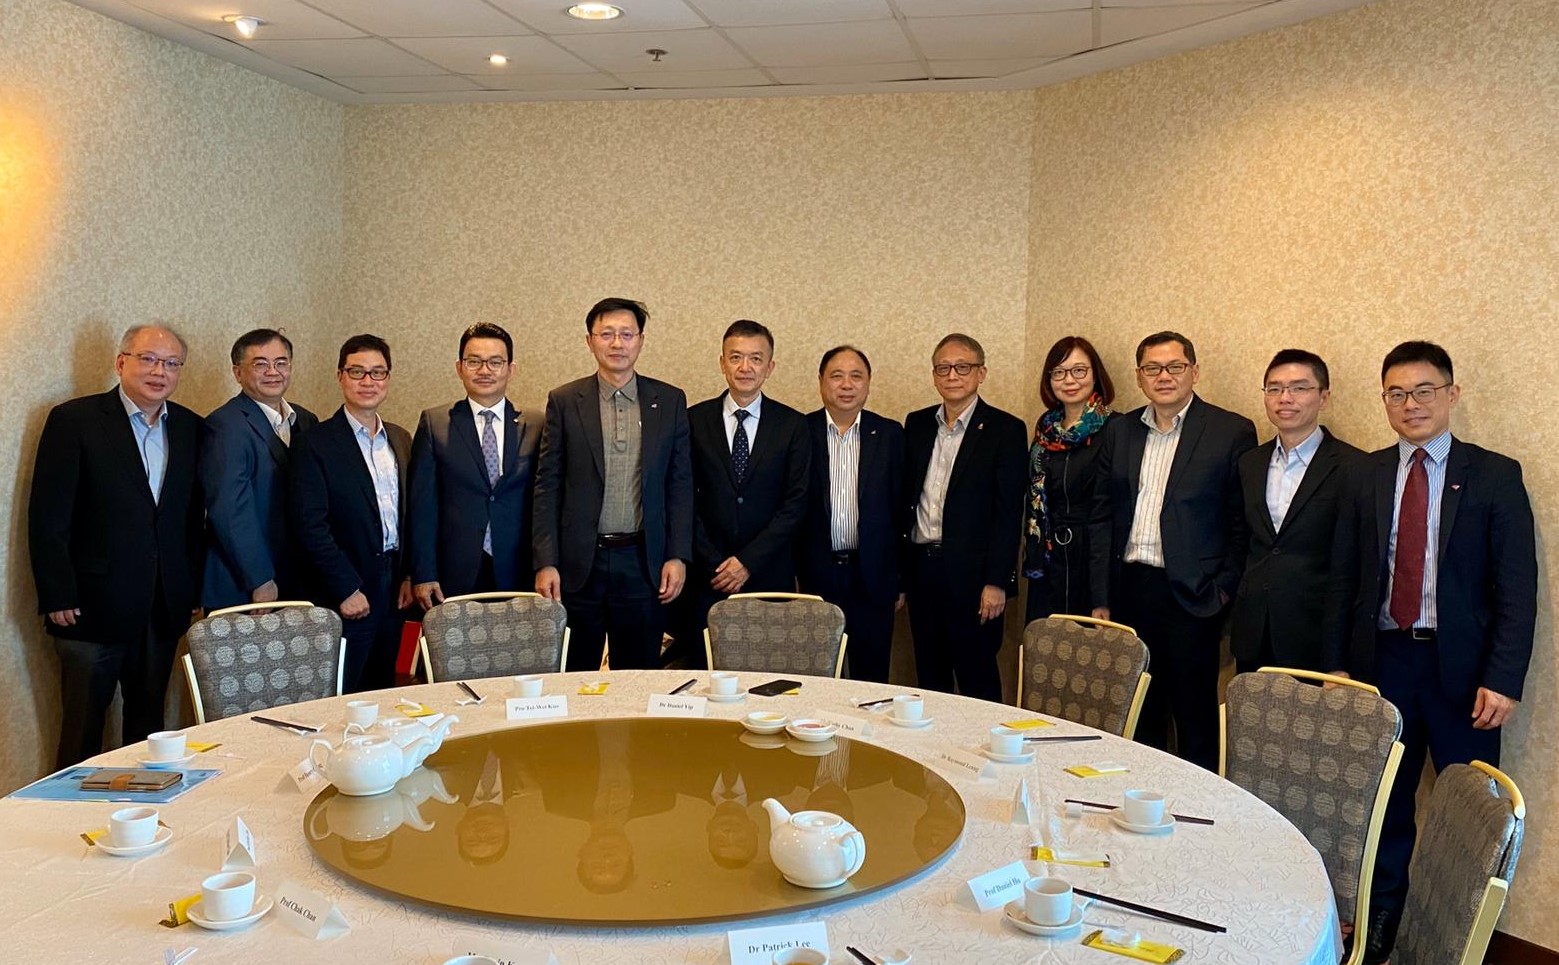 Representatives from the FHKI visited CityU in January 2020 to exchange and explore collaboration opportunities for the benefit of industry and the wider community of Hong Kong